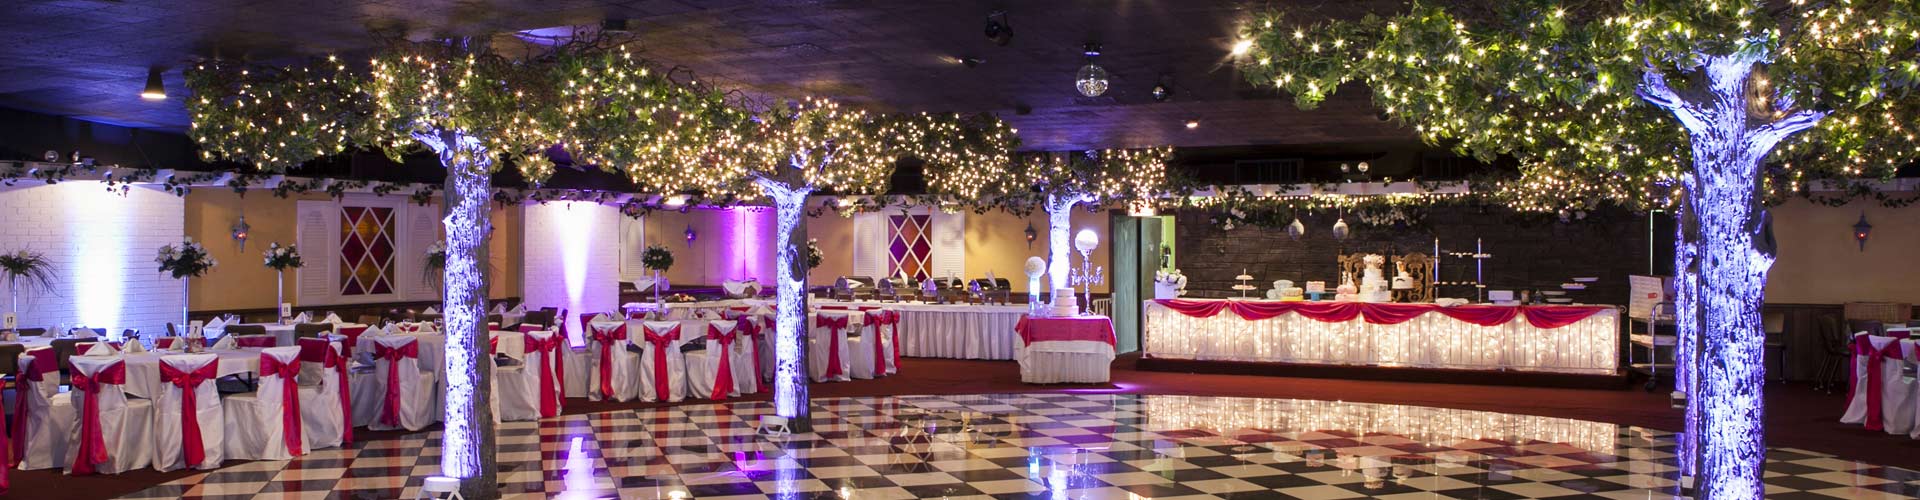 A Quinceanera function hall party with tables covered in red and white cloth